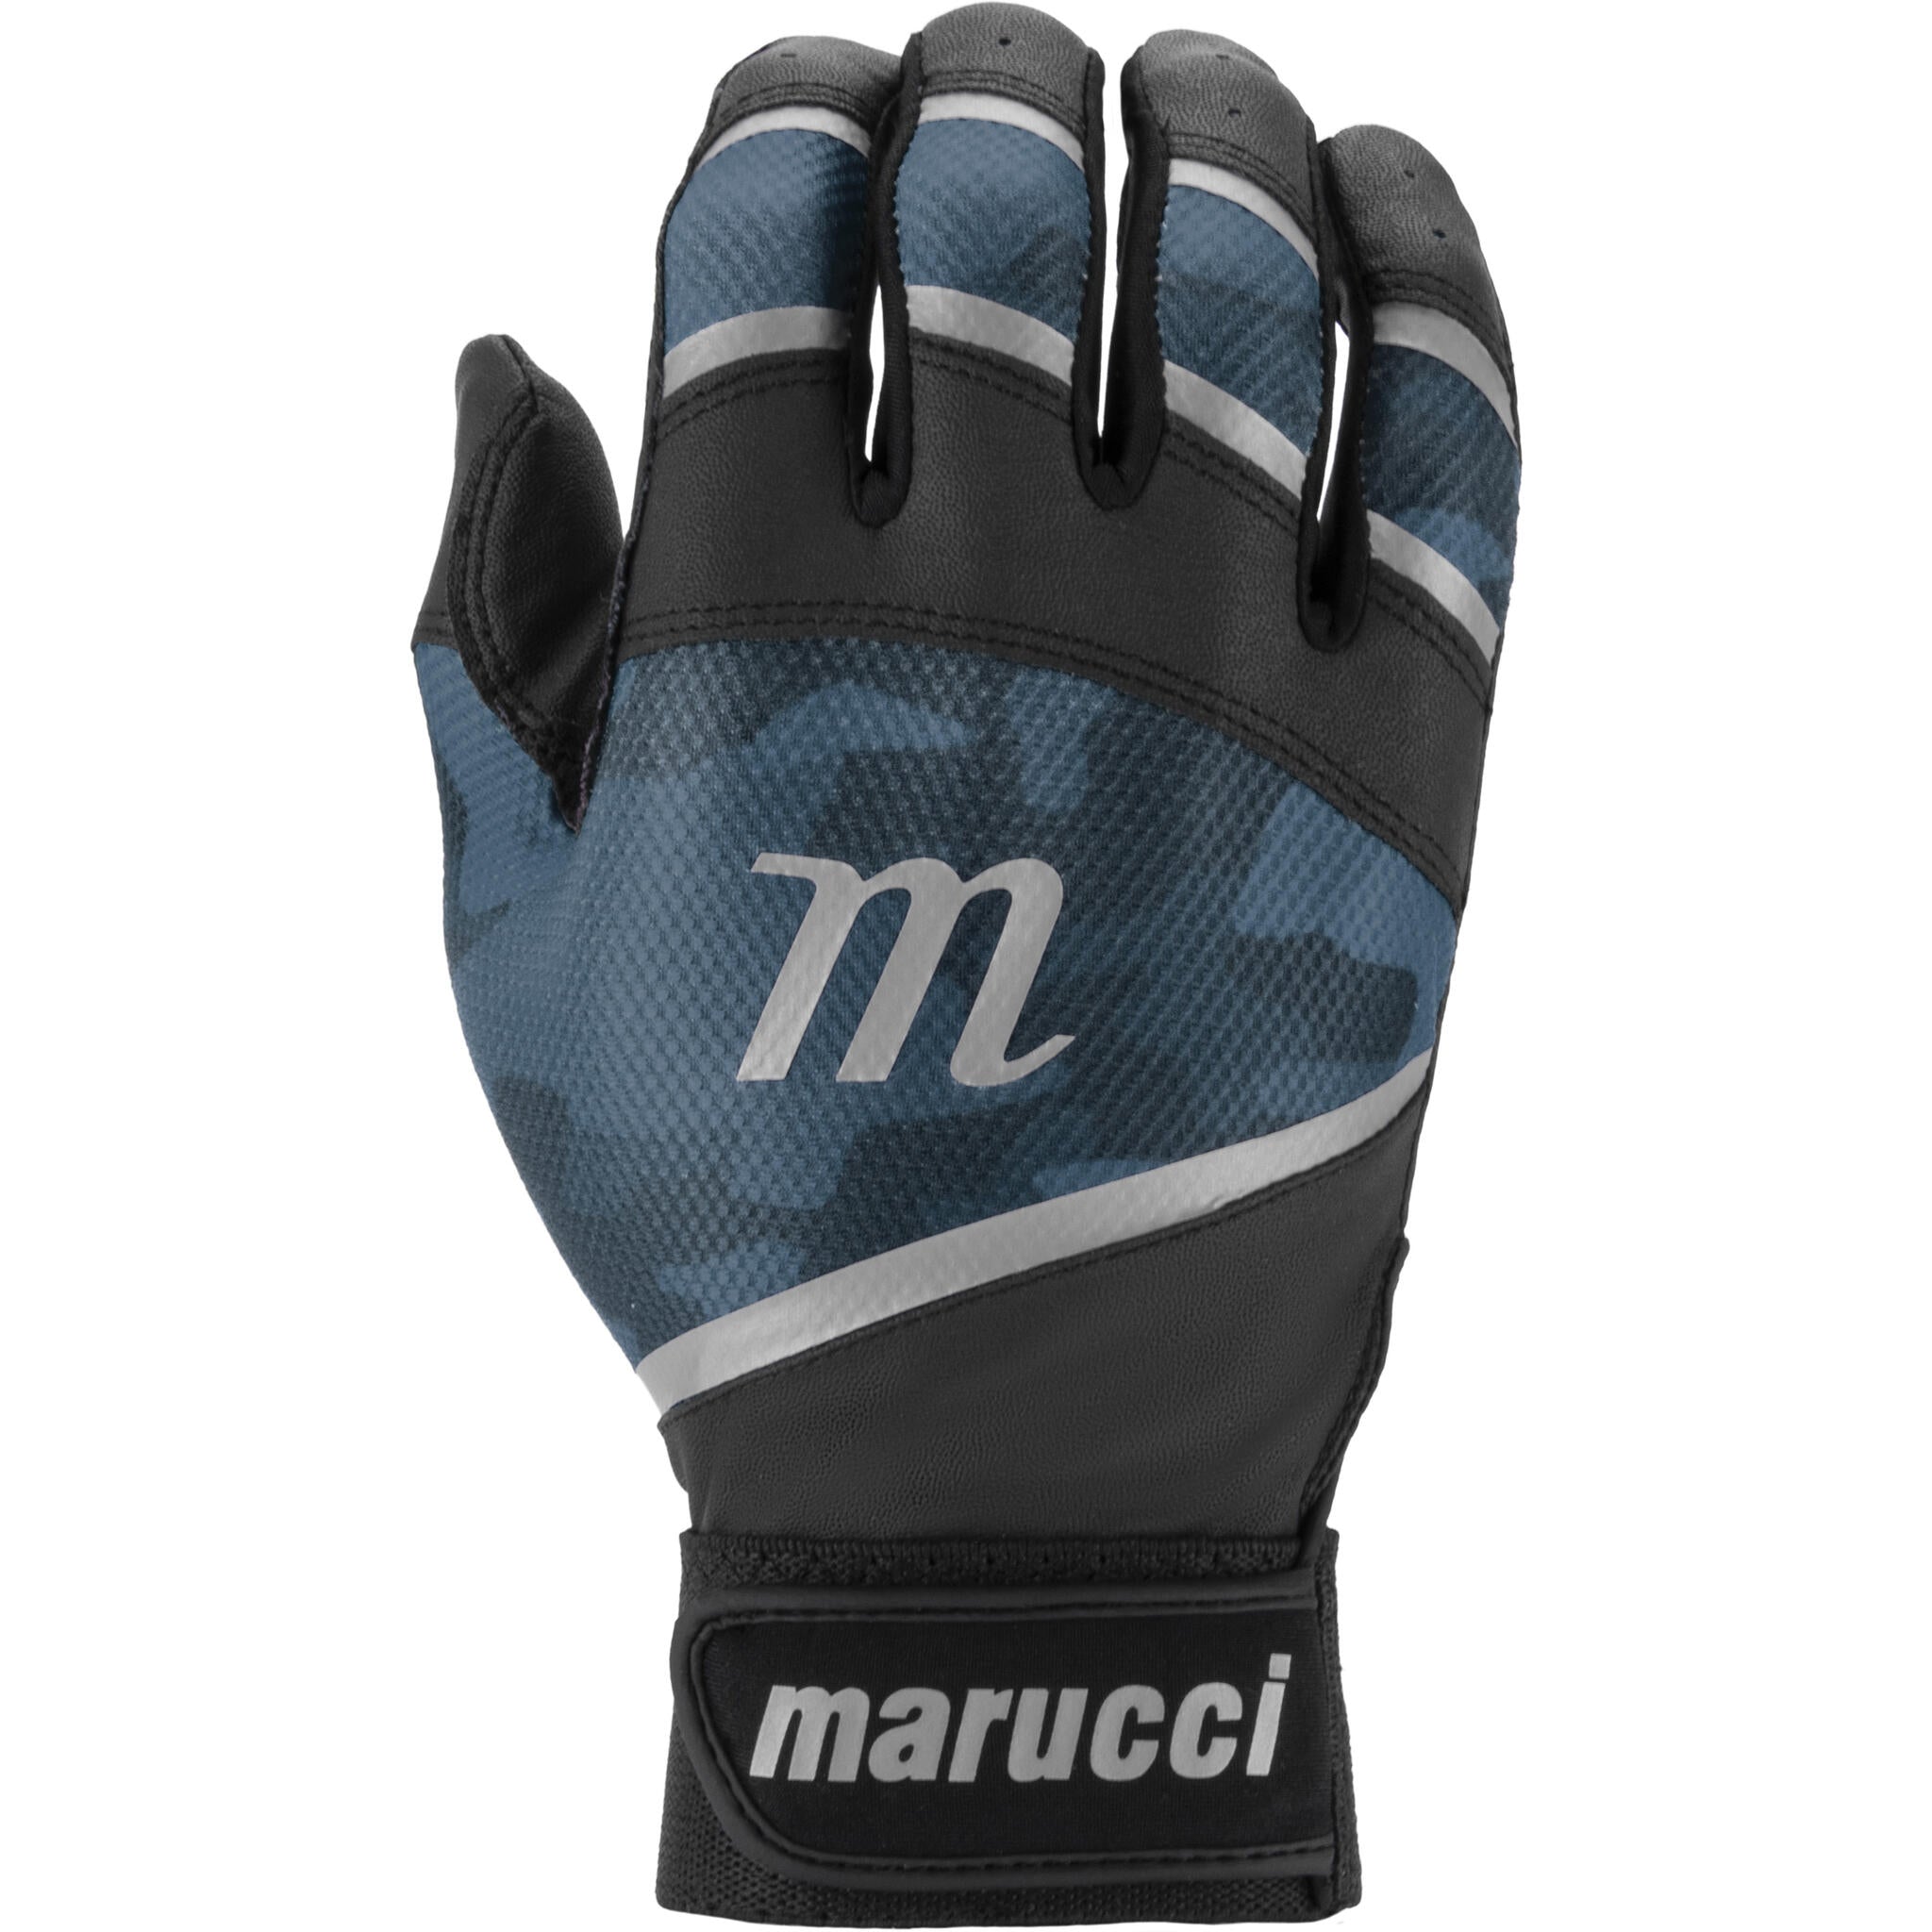 Marucci Foxtrot T-Ball Batting Gloves | Source for Sports